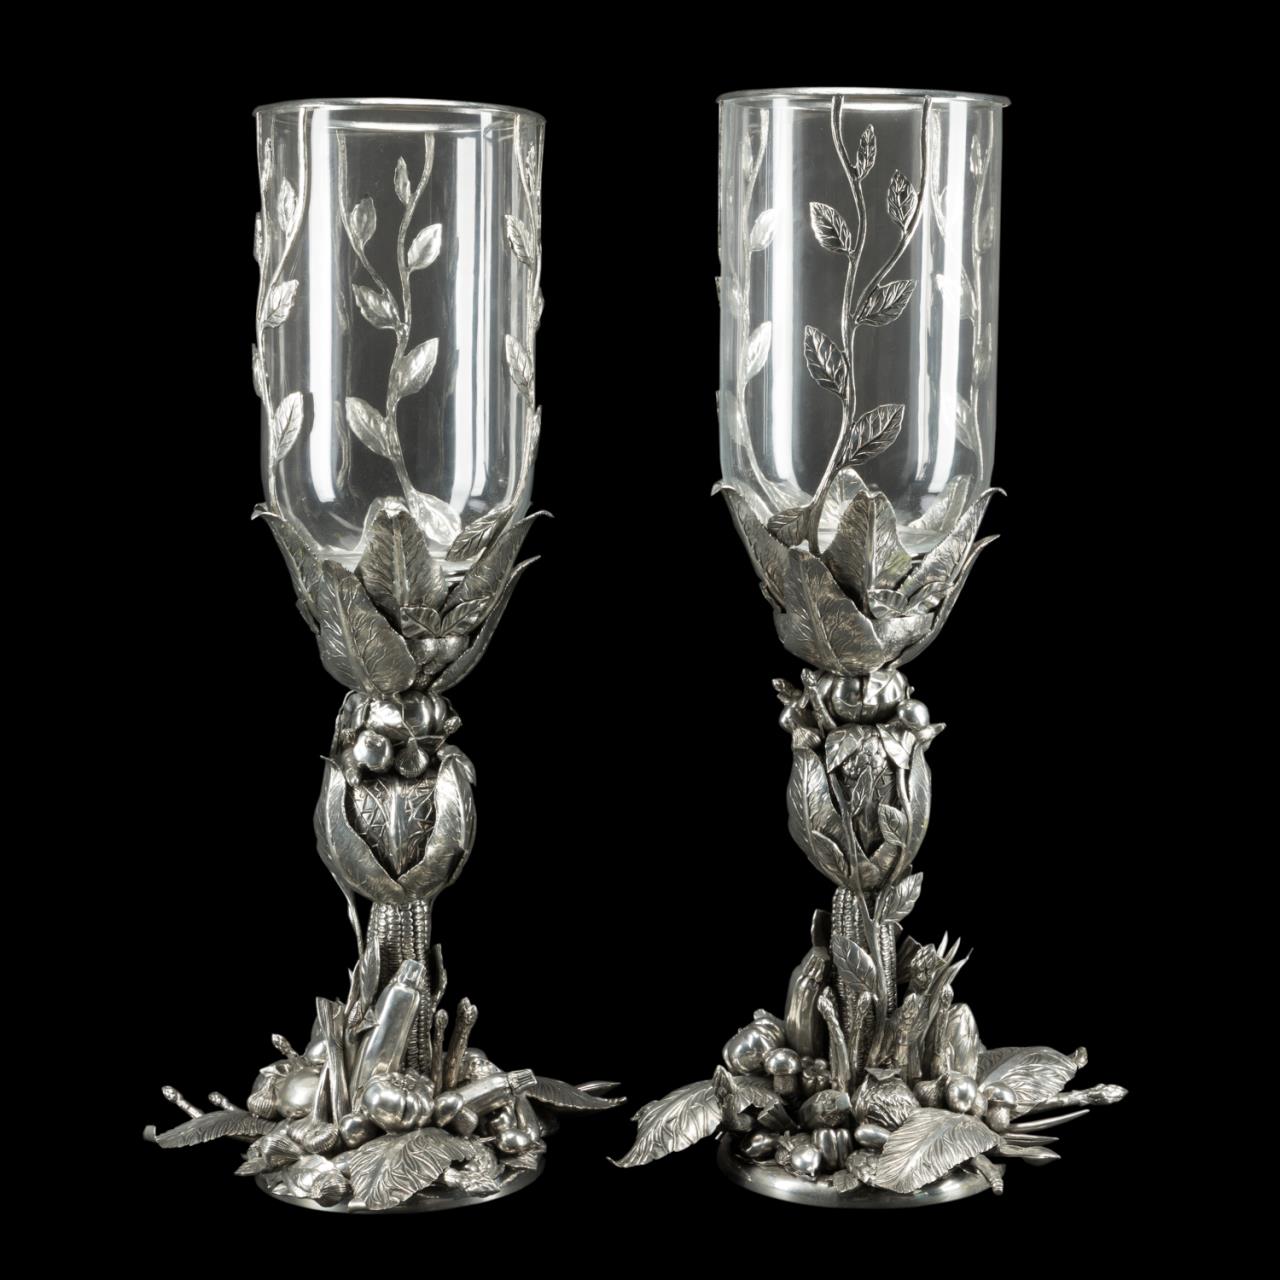 PAIR CIPOLLA FIGURAL PEWTER HURRICANES 2bff71